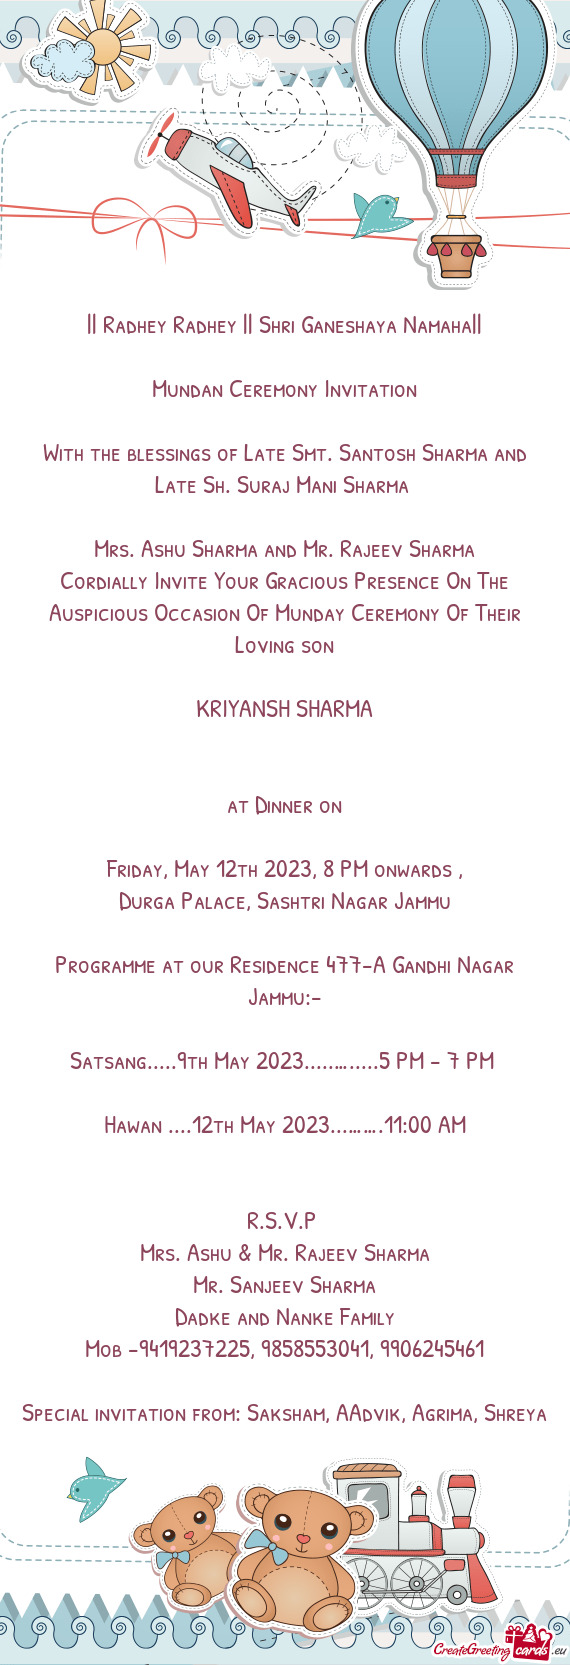 Cordially Invite Your Gracious Presence On The Auspicious Occasion Of Munday Ceremony Of Their Lovin